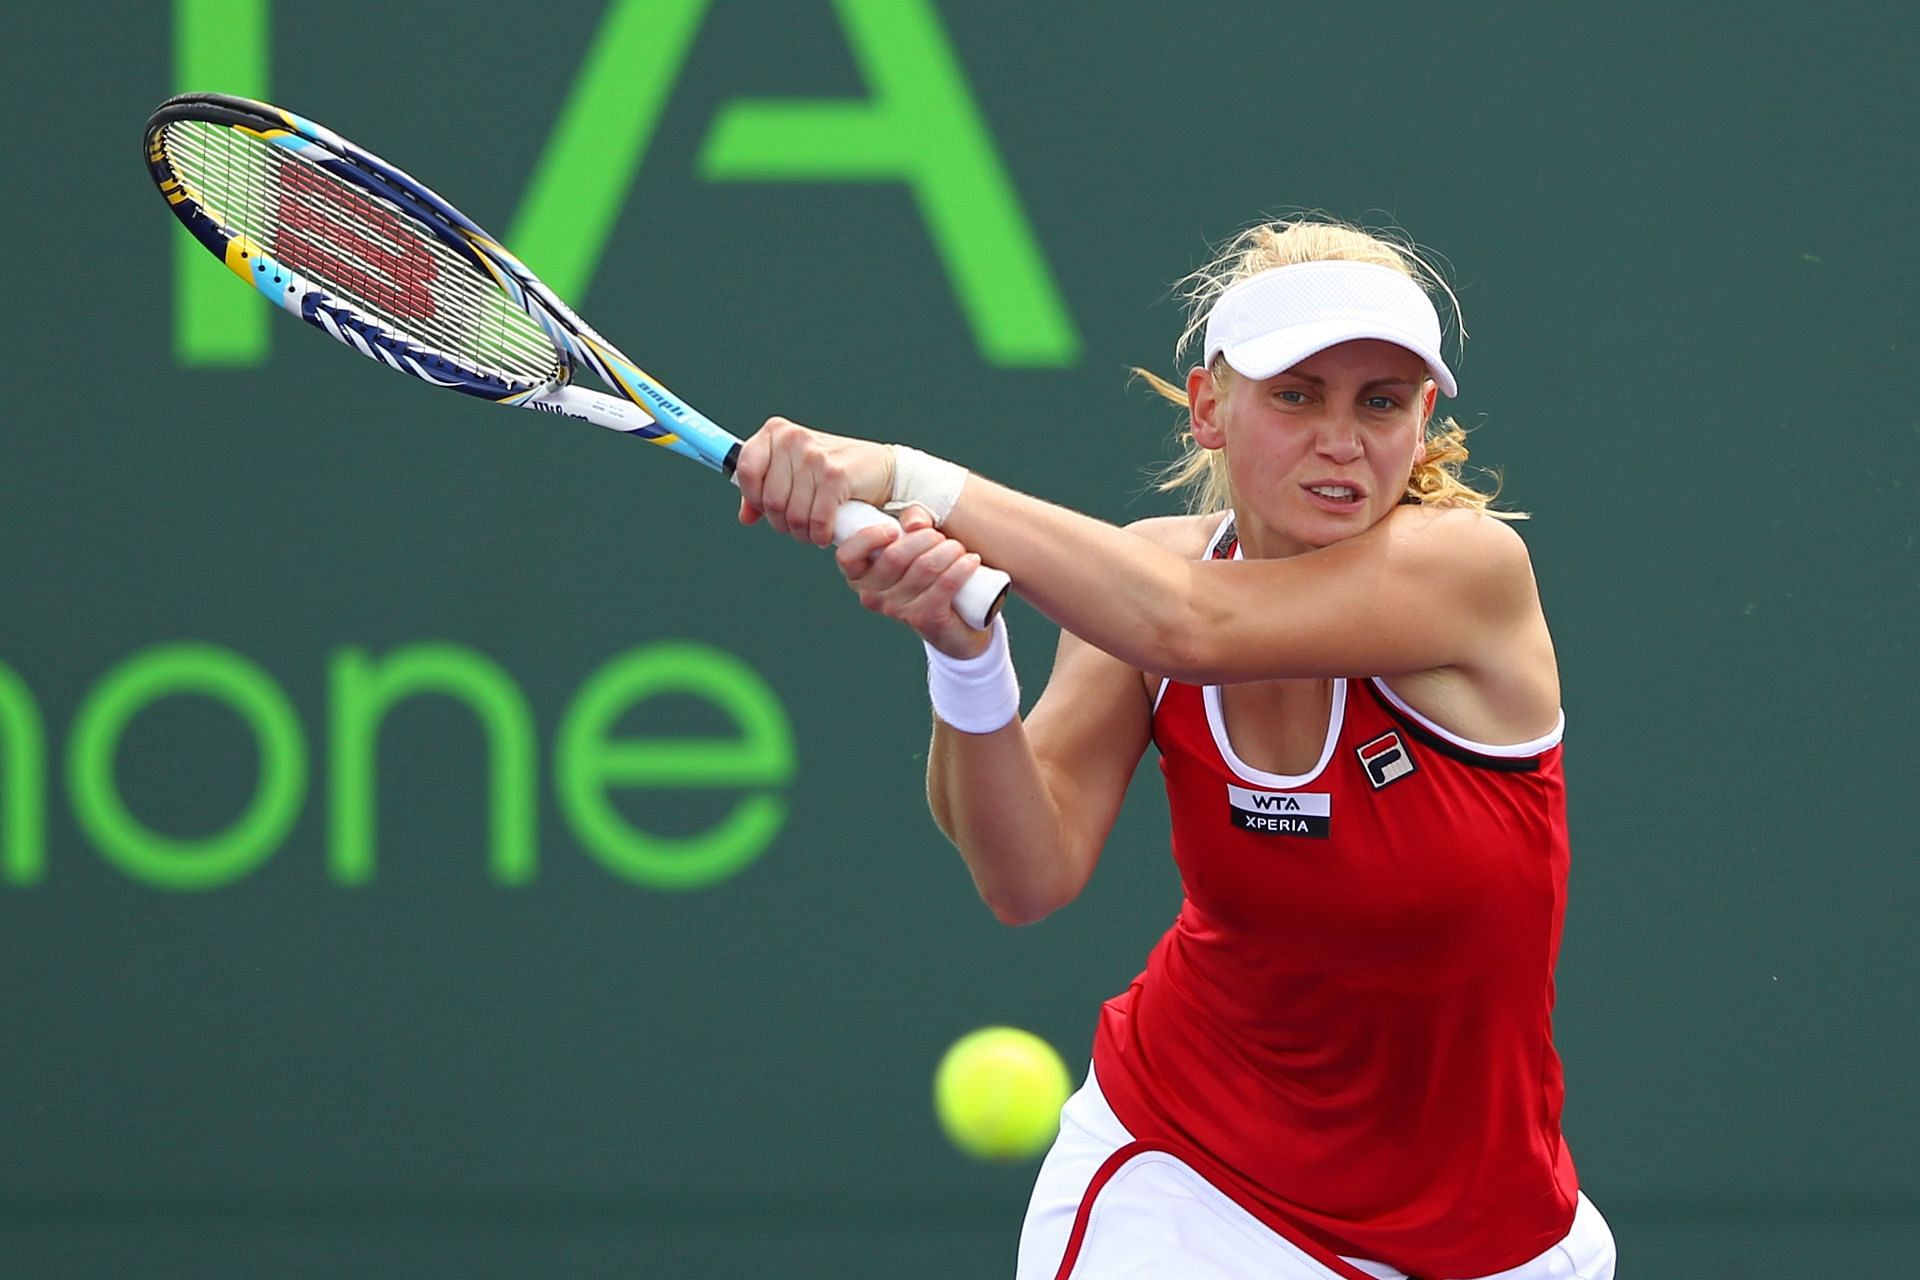 Jelena Dokic in action at the Sony Ericsson Open